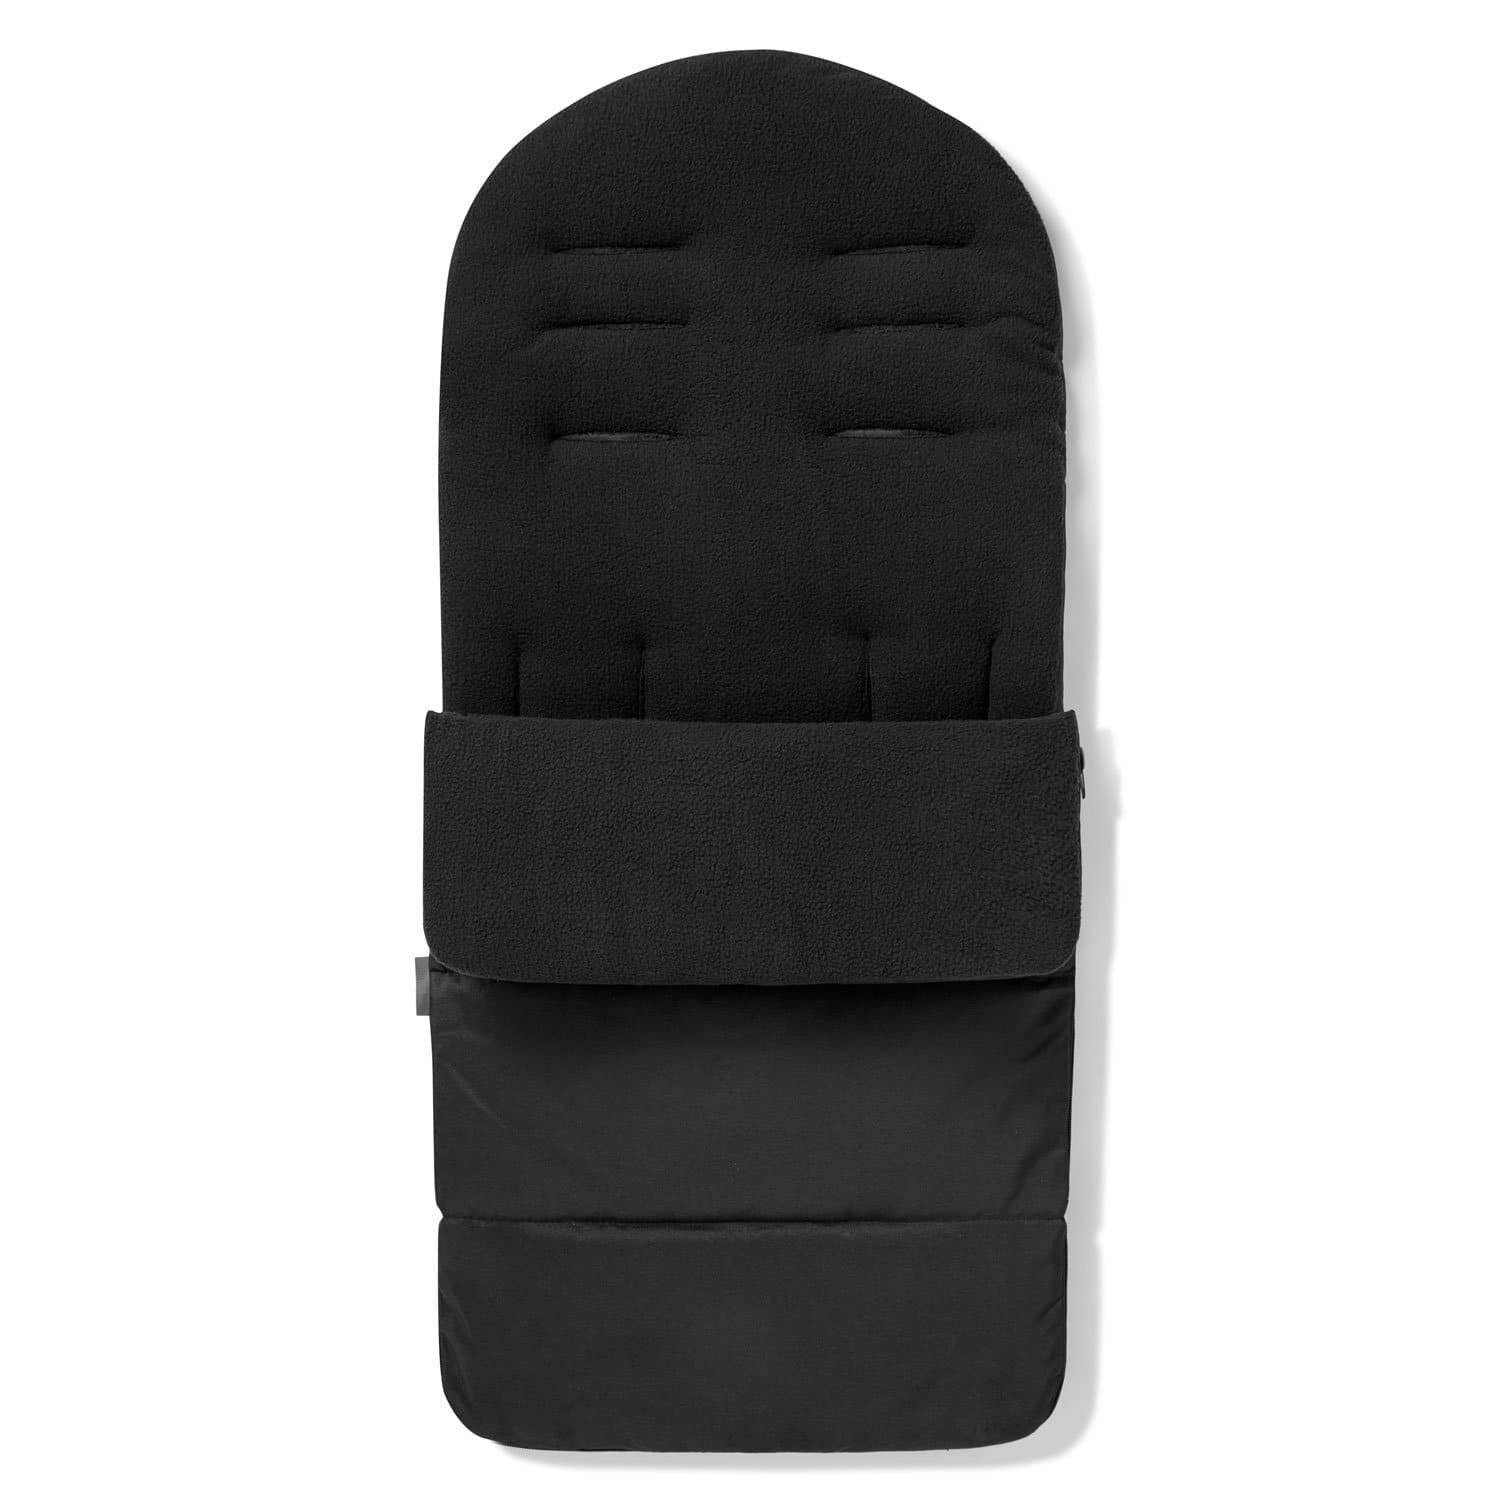 Premium Footmuff / Cosy Toes Compatible with BabiesRus - Black Jack / Fits All Models | For Your Little One